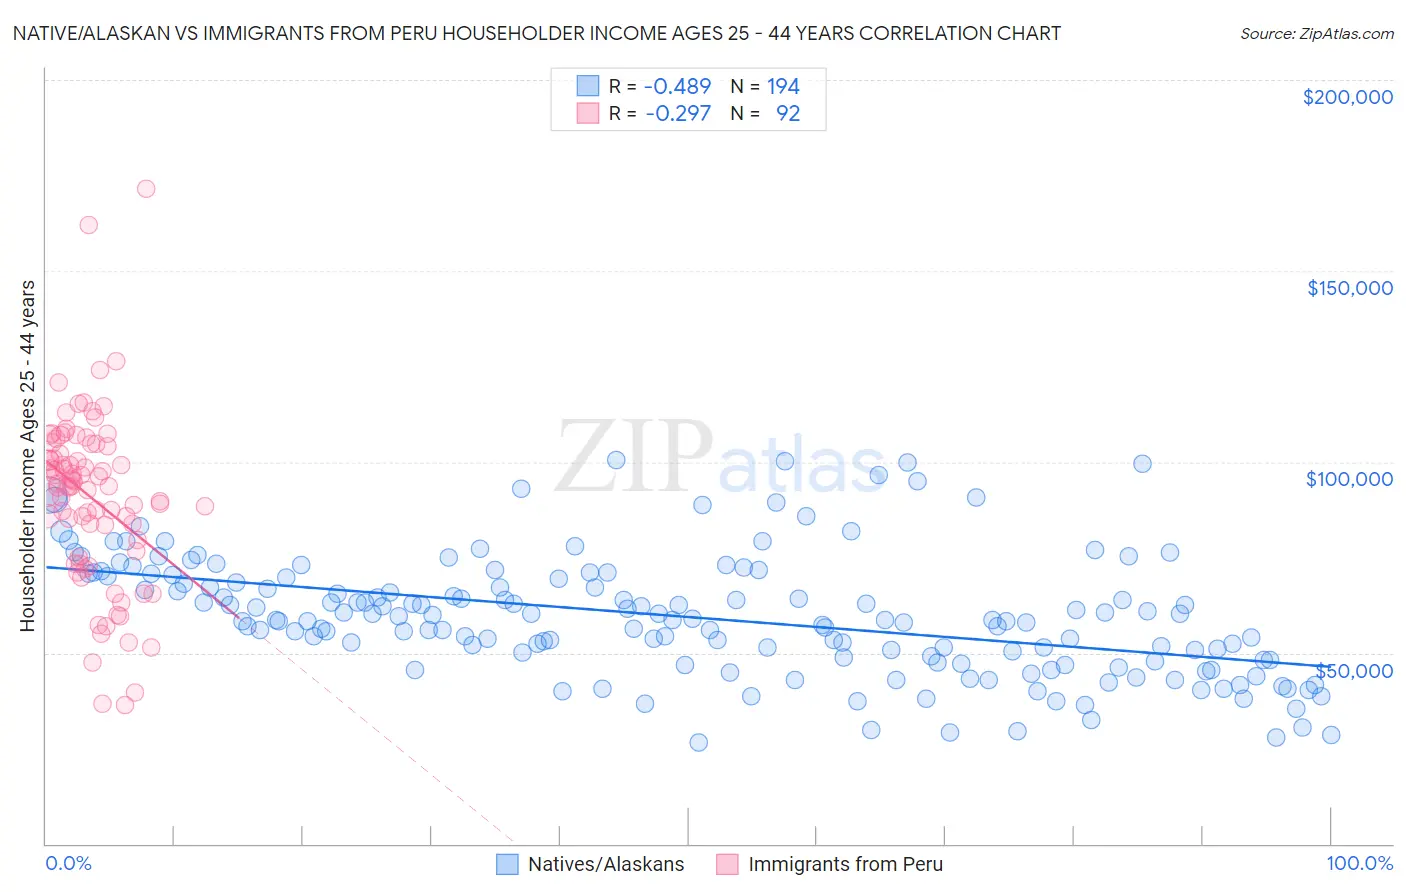 Native/Alaskan vs Immigrants from Peru Householder Income Ages 25 - 44 years